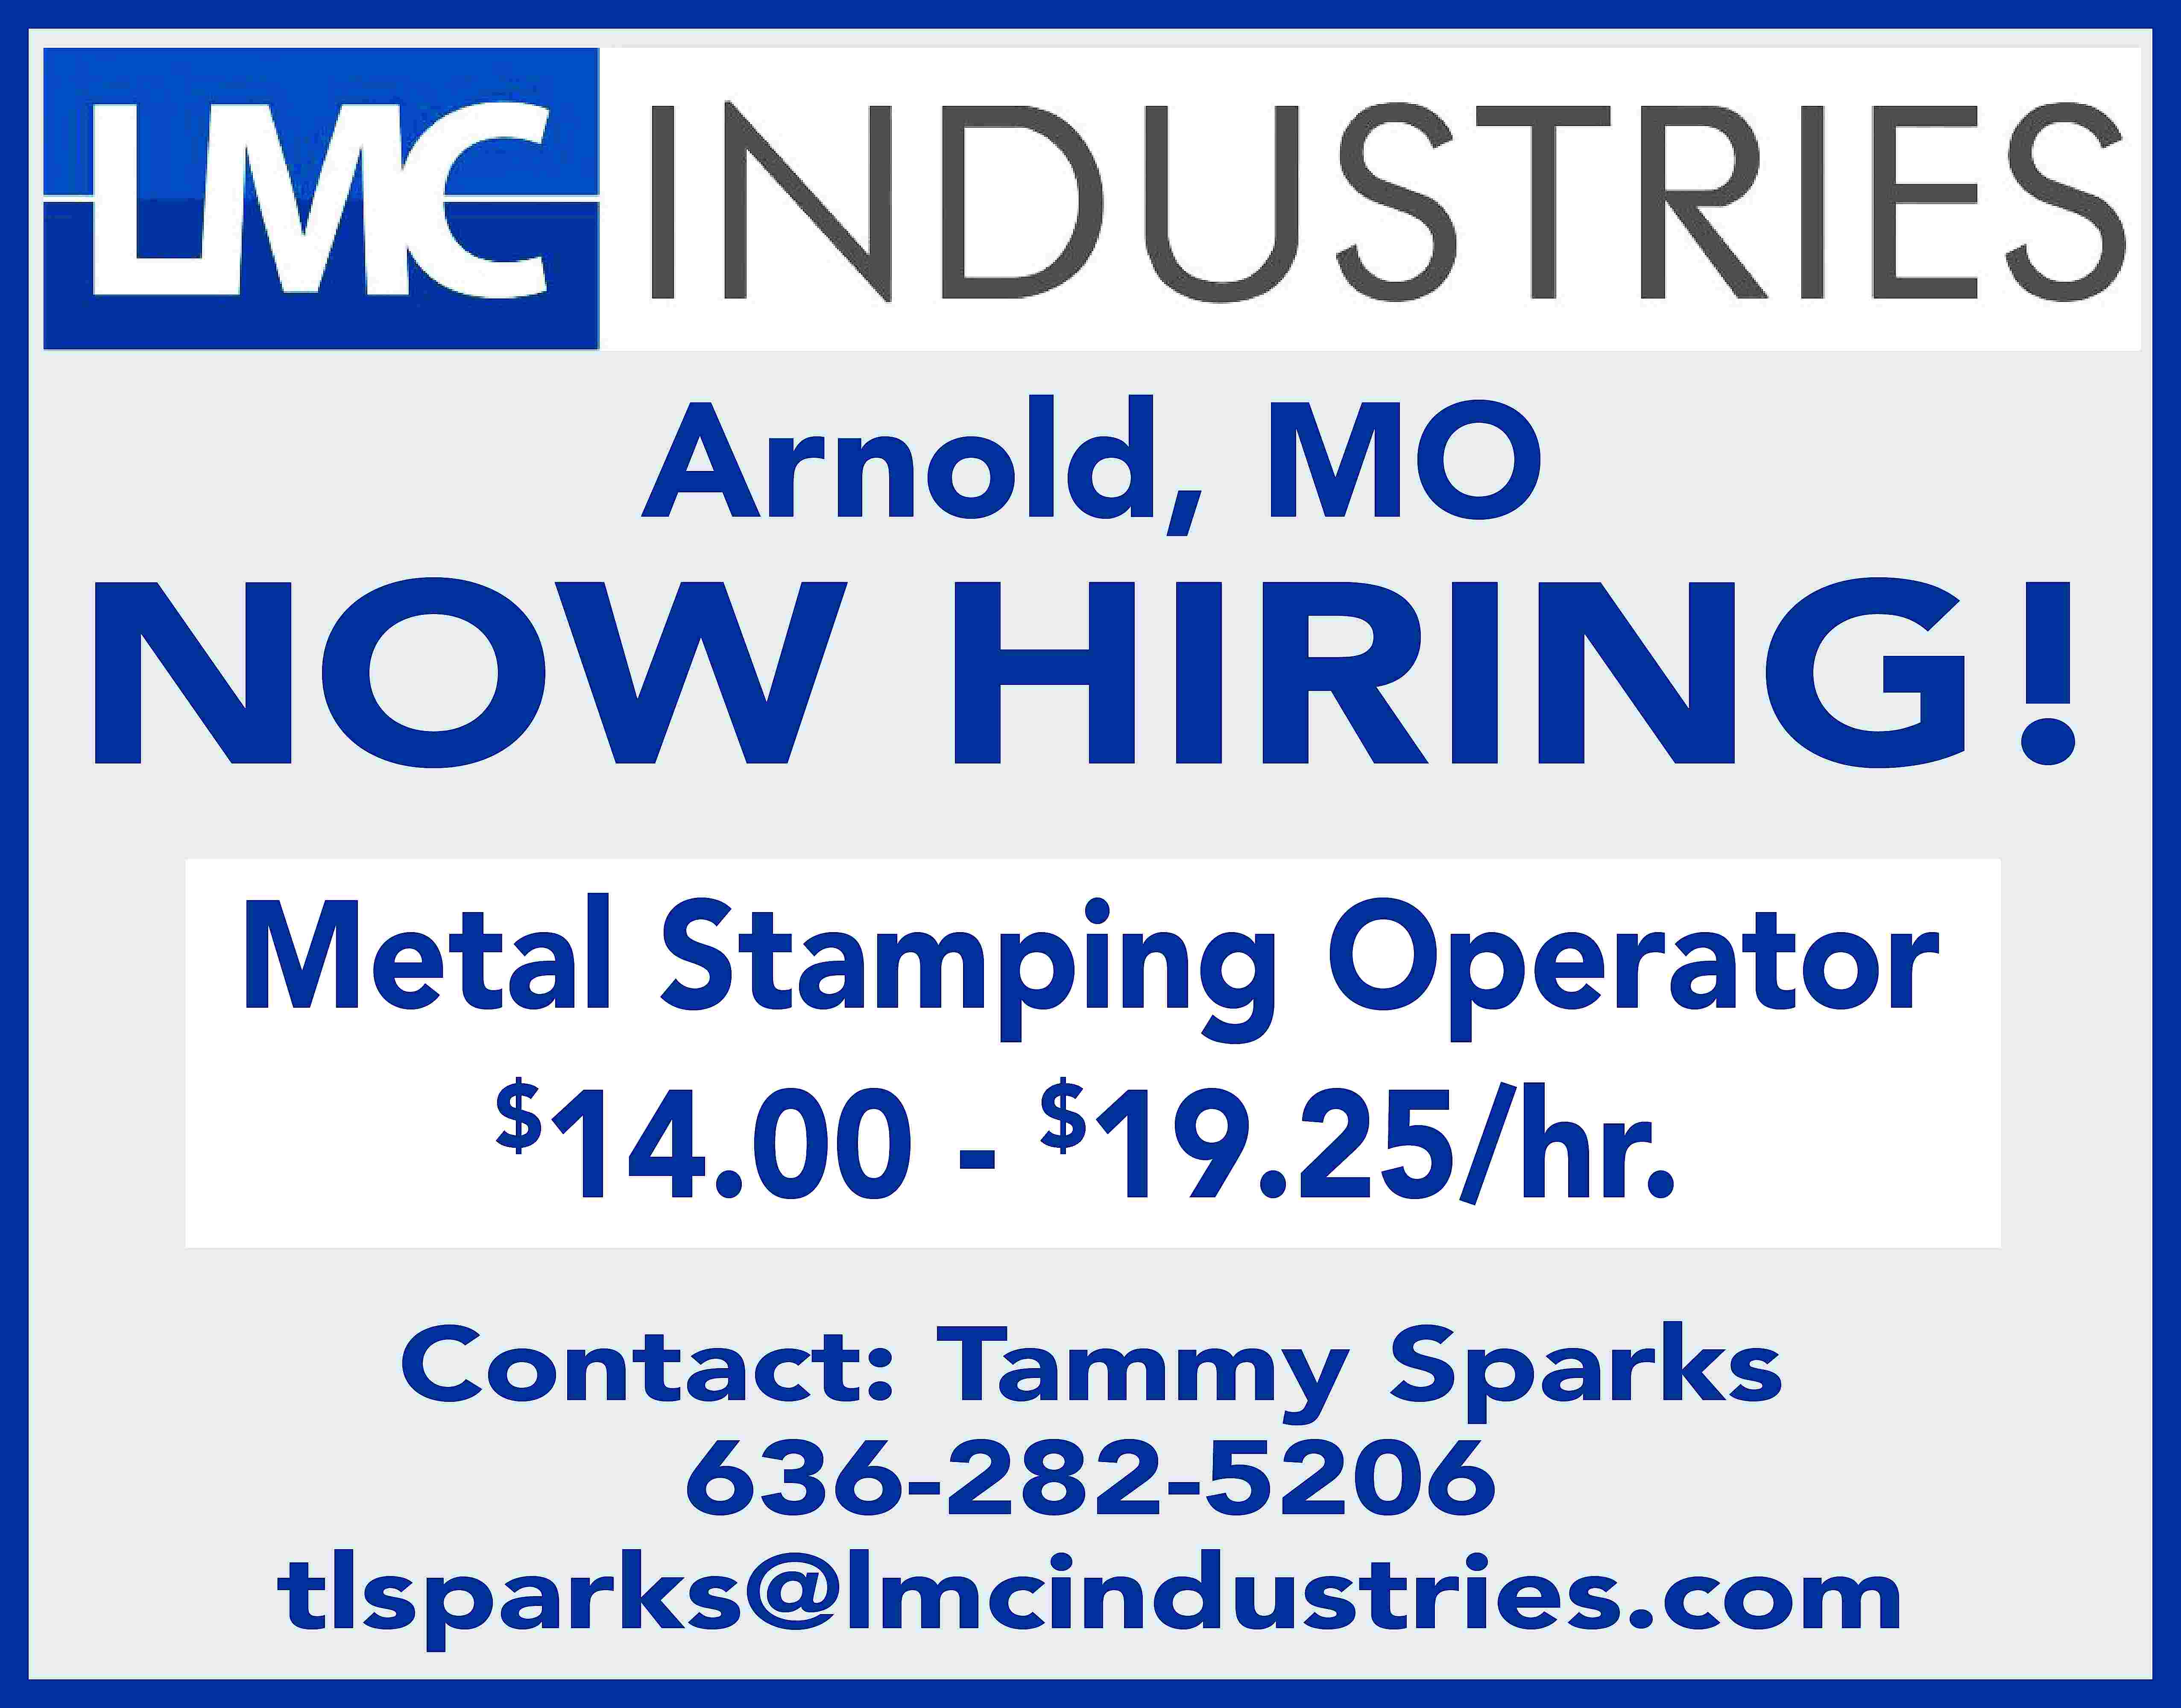 Arnold, MO NOW HIRING! Metal  Arnold, MO NOW HIRING! Metal Stamping Operator $ 14.00 - $19.25/hr. Contact: Tammy Sparks 636-282-5206 tlsparks@lmcindustries.com